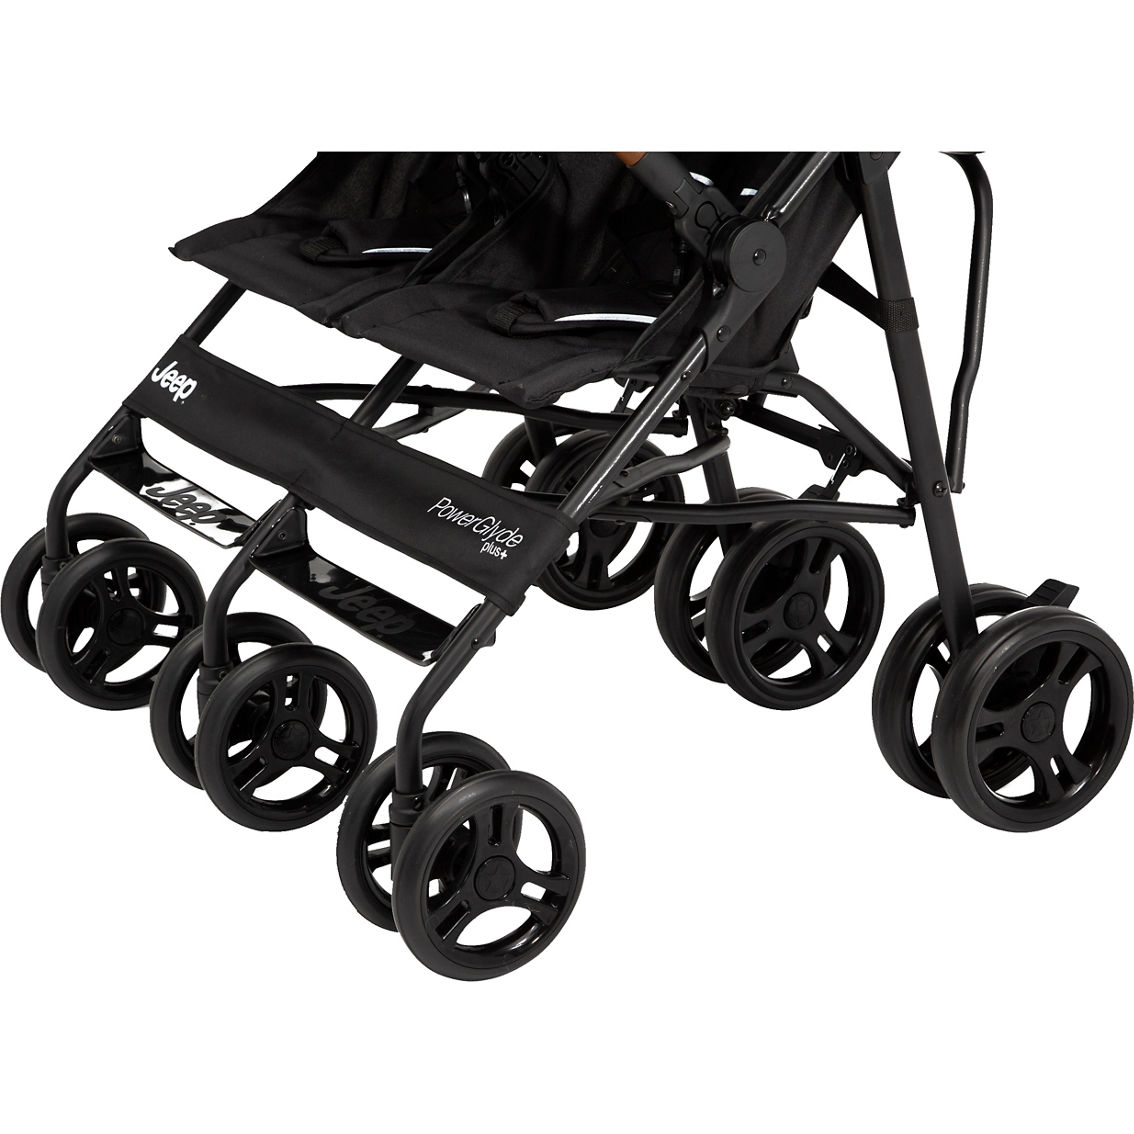 Jeep PowerGlyde Plus Side x Side Double Stroller - Image 9 of 9